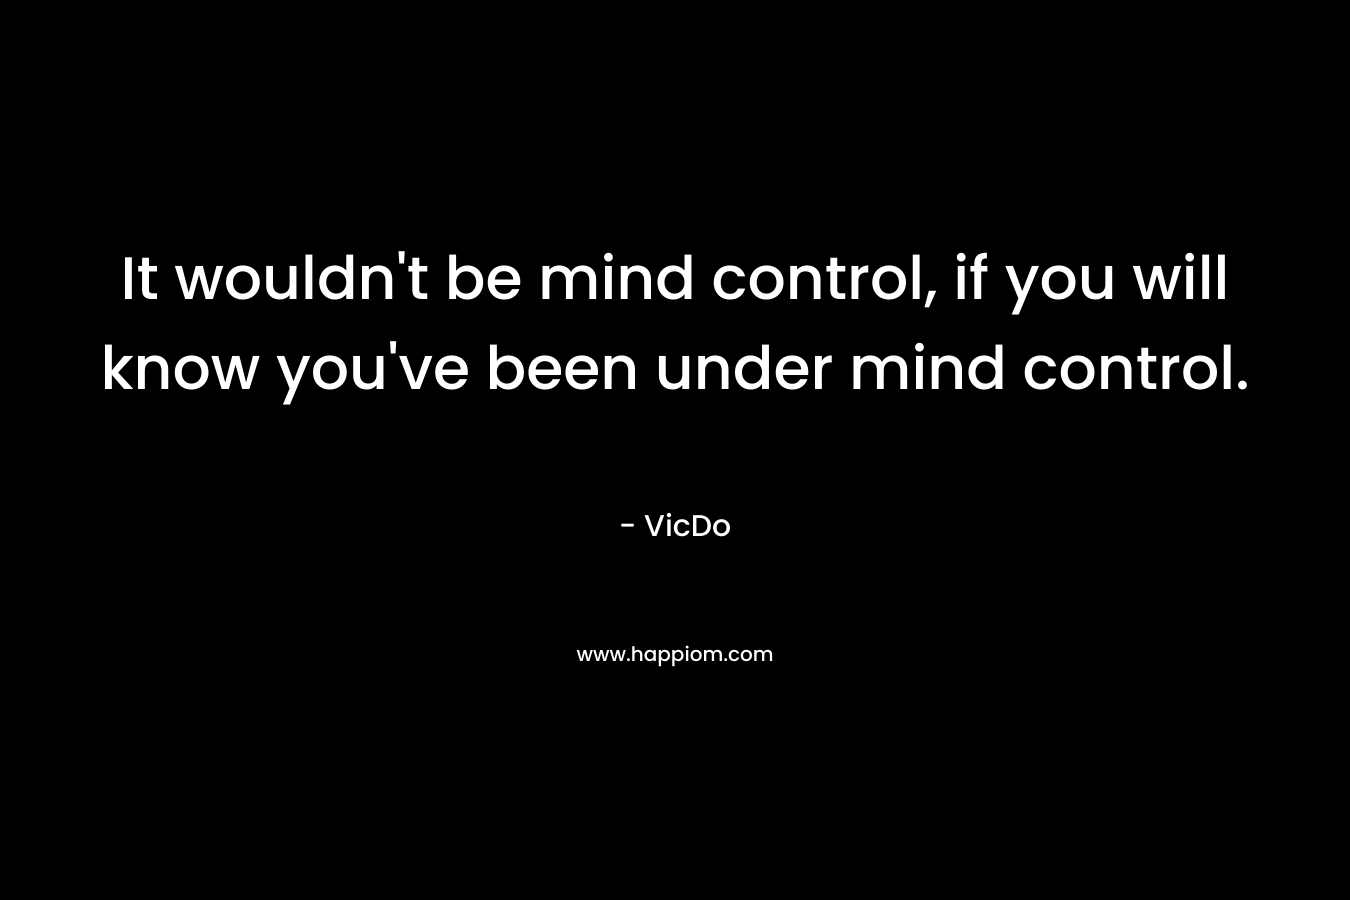 It wouldn't be mind control, if you will know you've been under mind control.